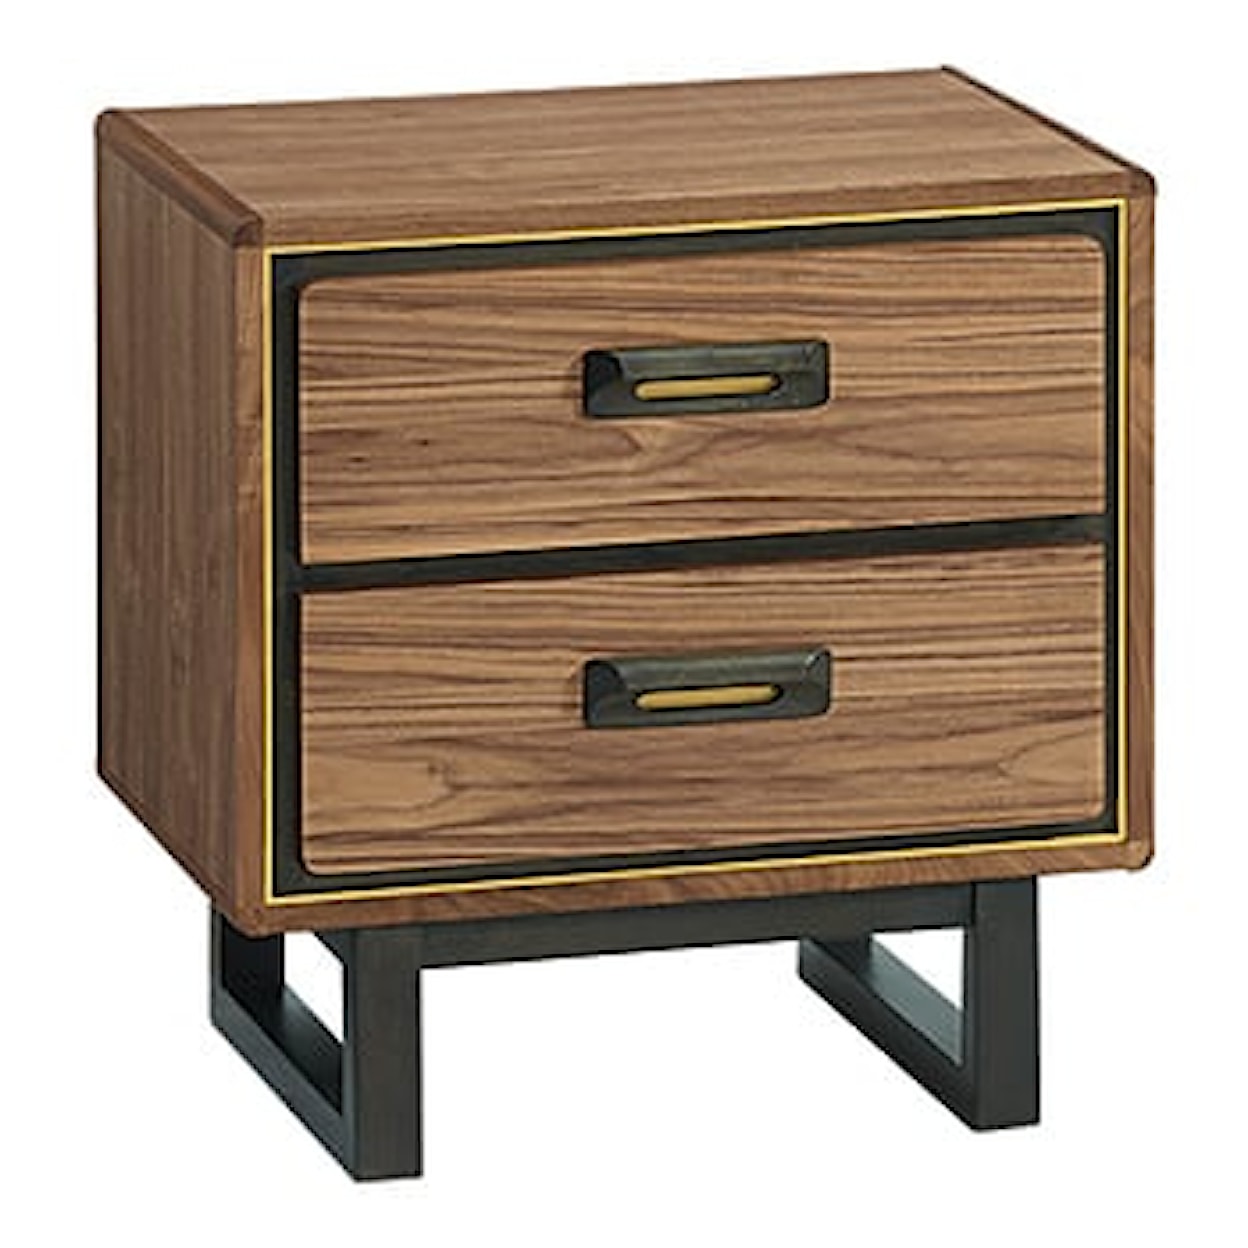 Whittier Wood Bryce 2-Drawer Nightstand with Metal Legs